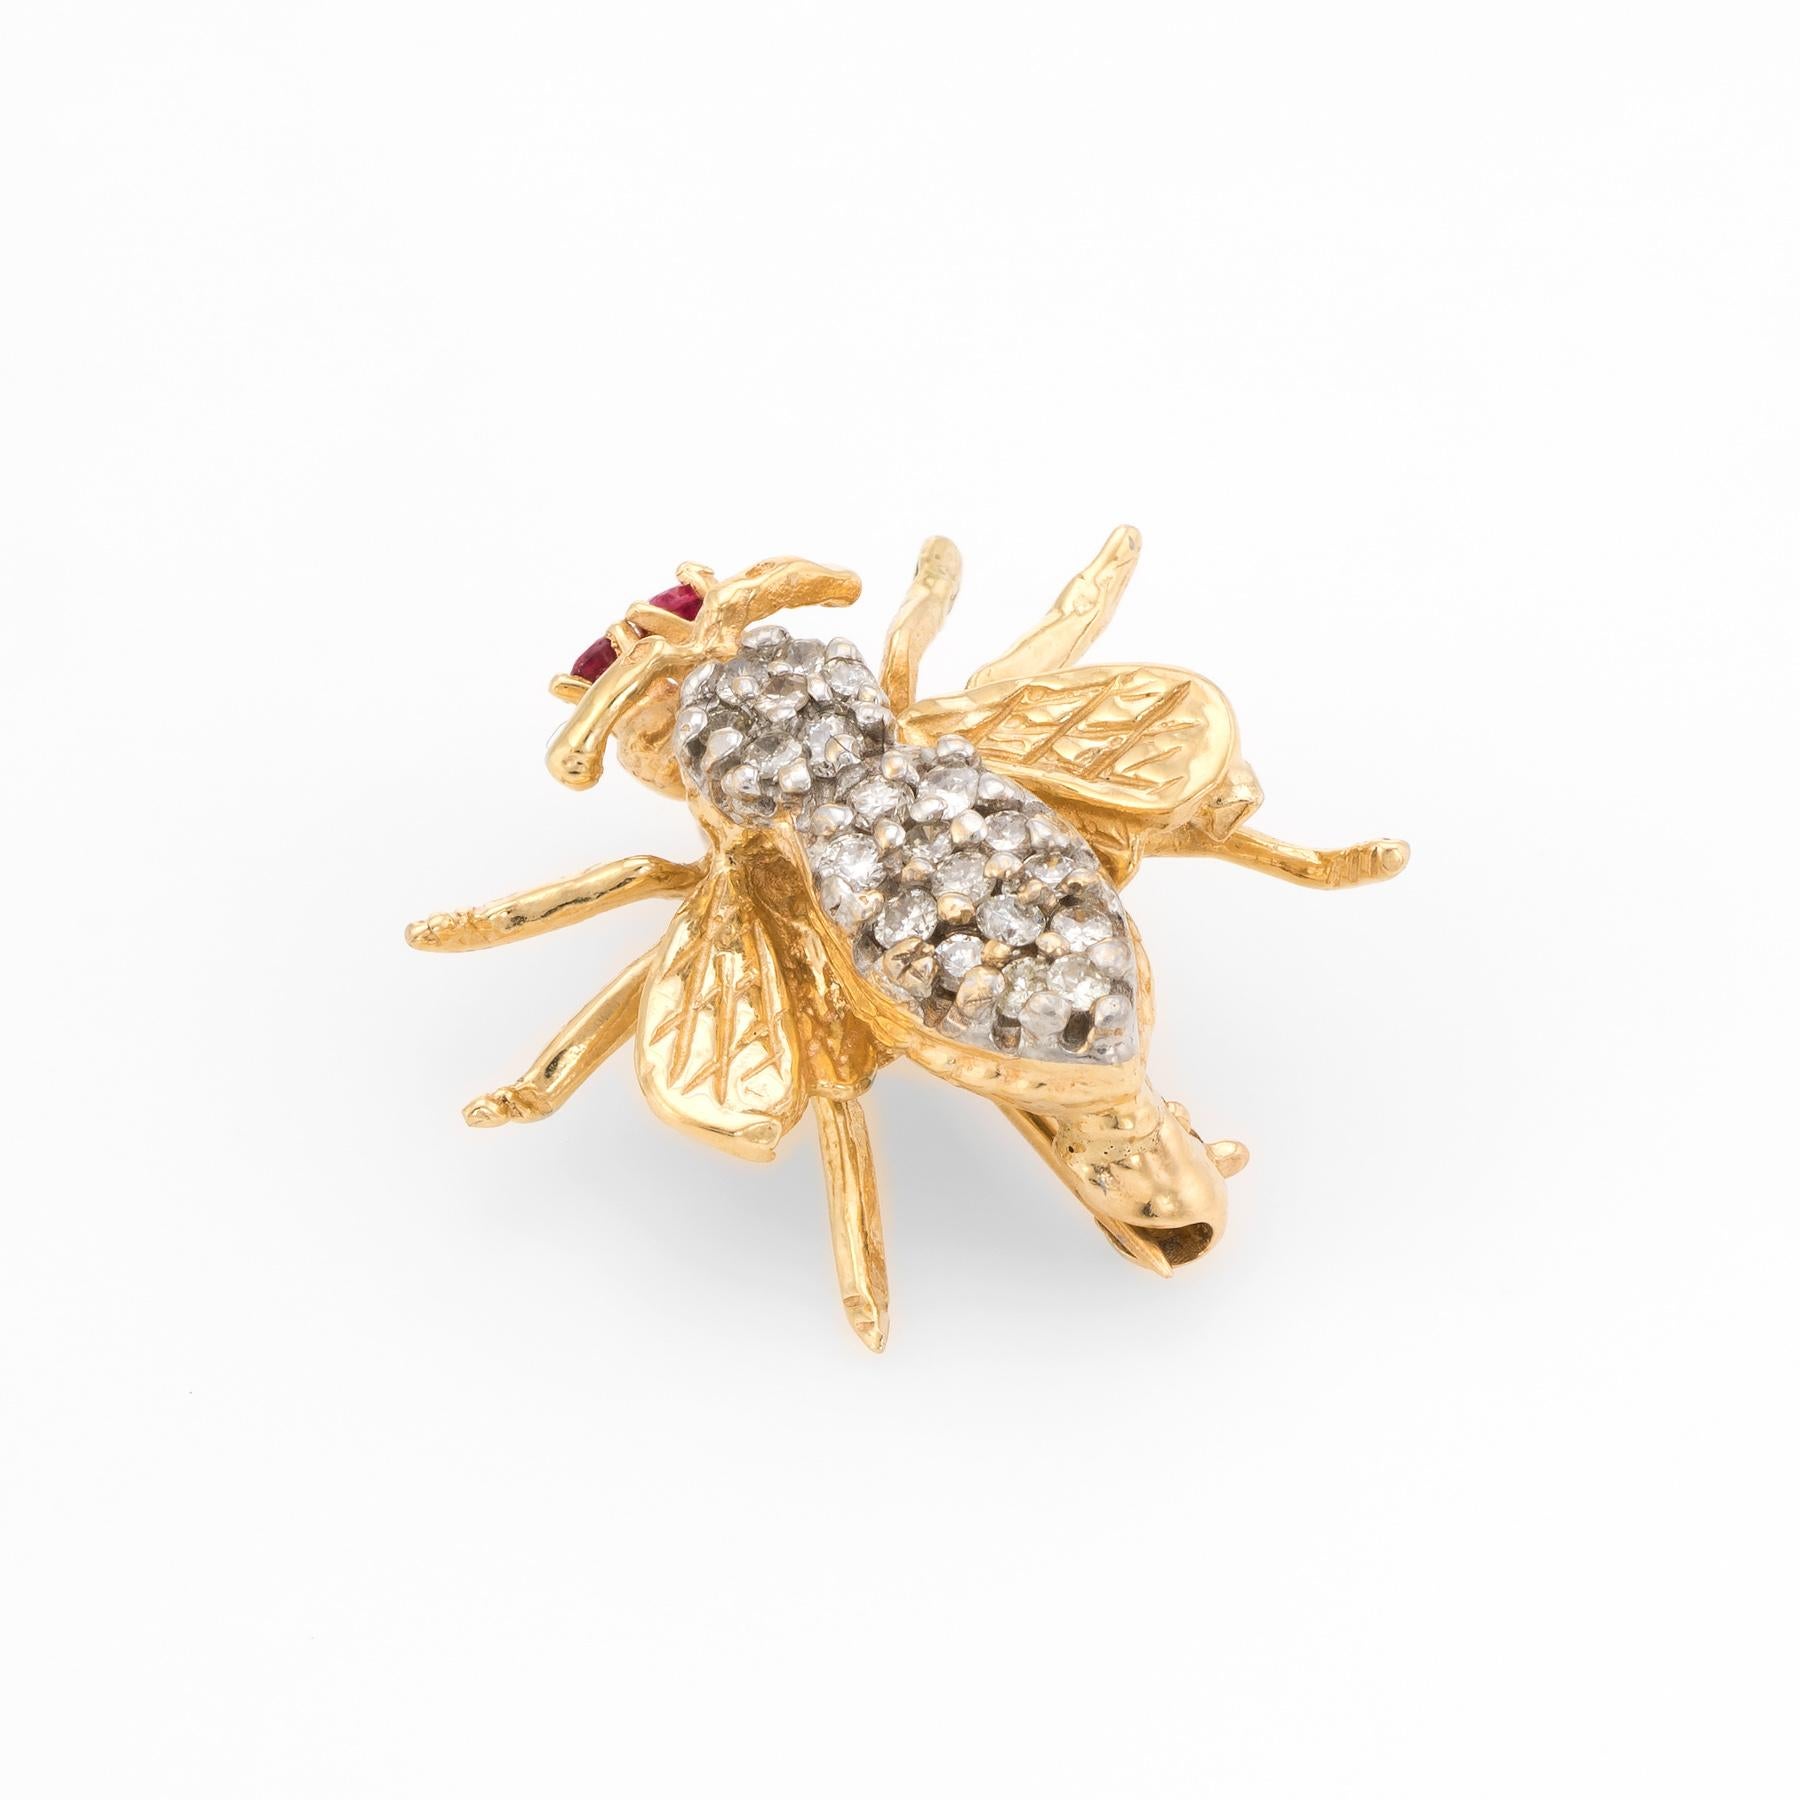 Modern Vintage Bumble Bee Brooch Pin Diamond Ruby 14 Karat Yellow Gold Insect Jewelry